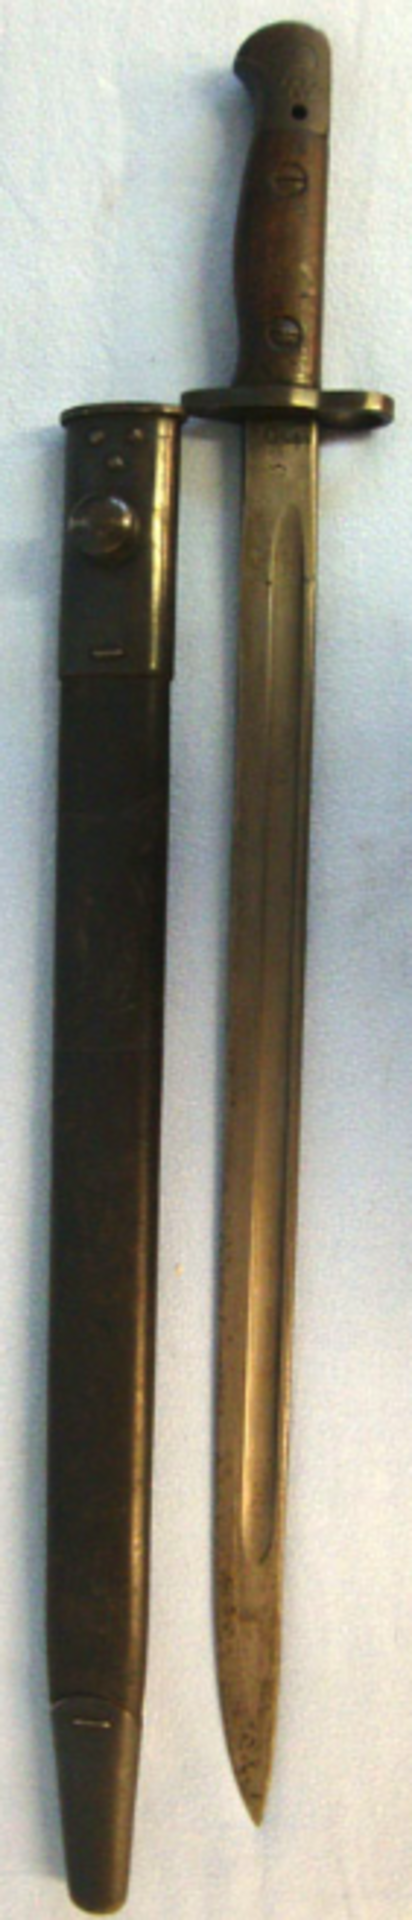 British 1917 '07' Bayonet for the S.M.L.E. Stamped to Ampleforth College Officer's Training Corps.